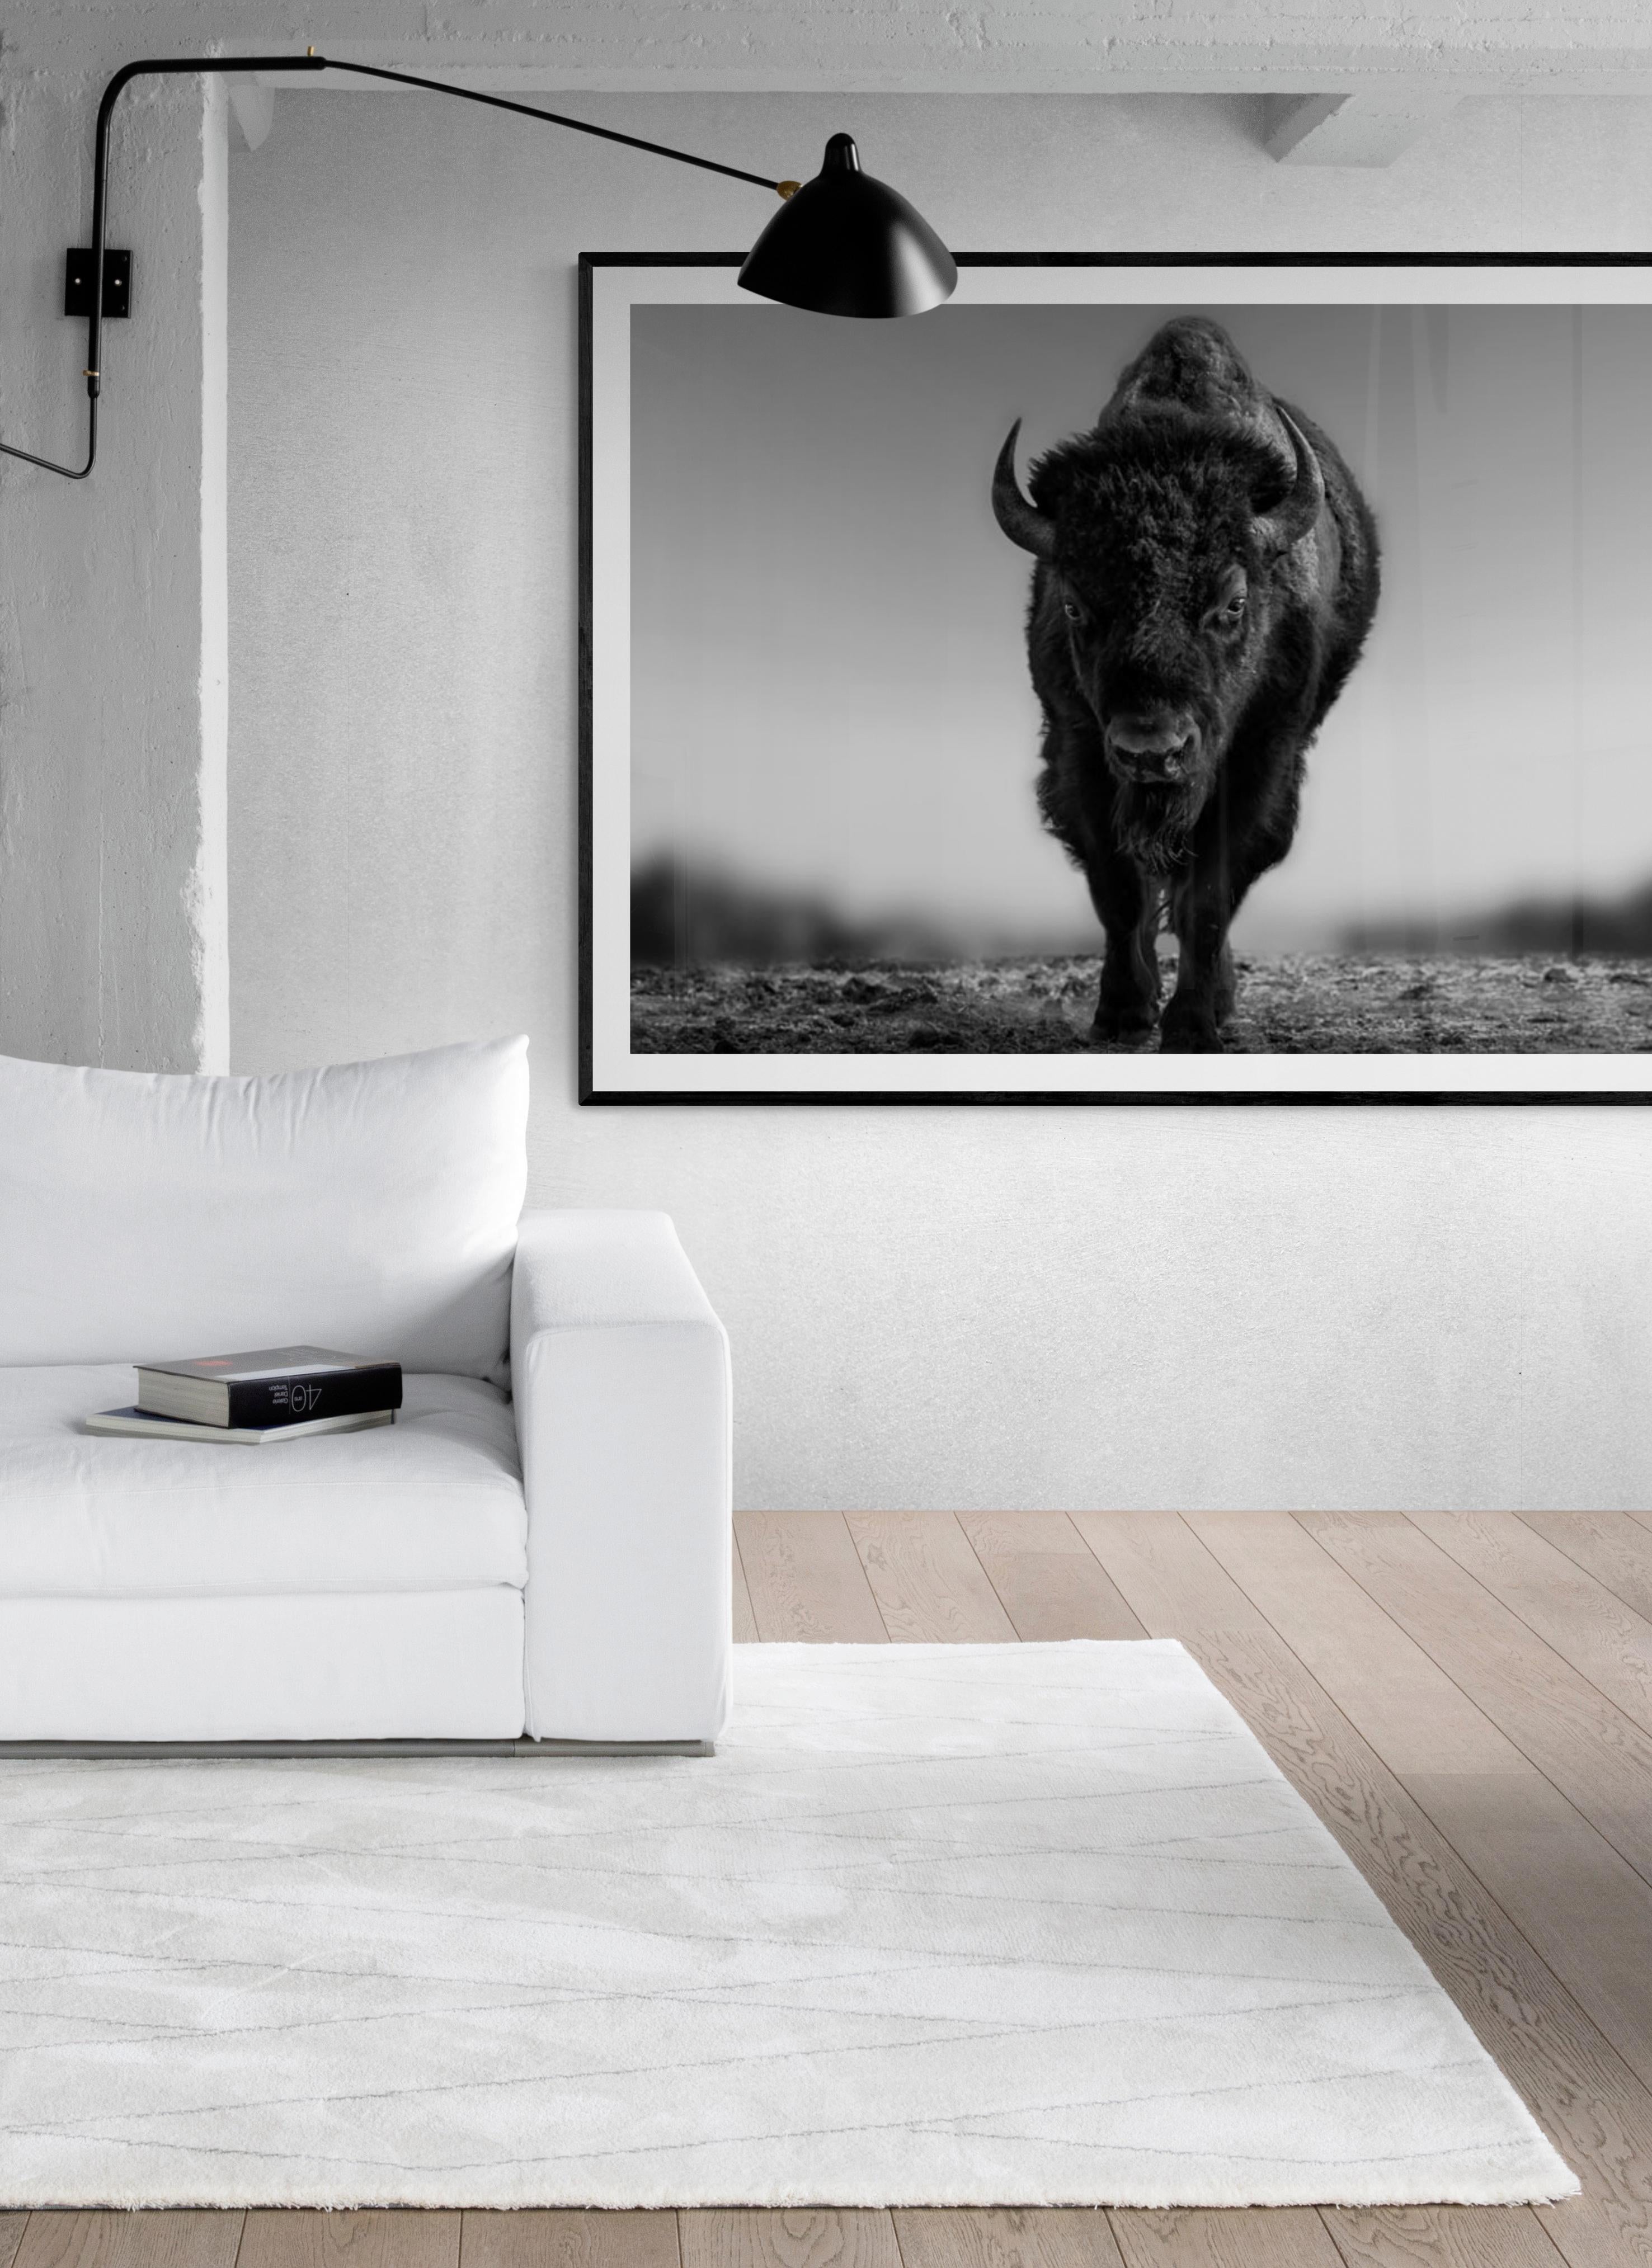 Contemporary photograph of an American Bison.  
24x36 Edition of 50. 
Signed and numbered.
Printed on archival paper and using archival inks
Framing available. Inquire for rates.   

 Shane Russeck has built a reputation for capturing America's